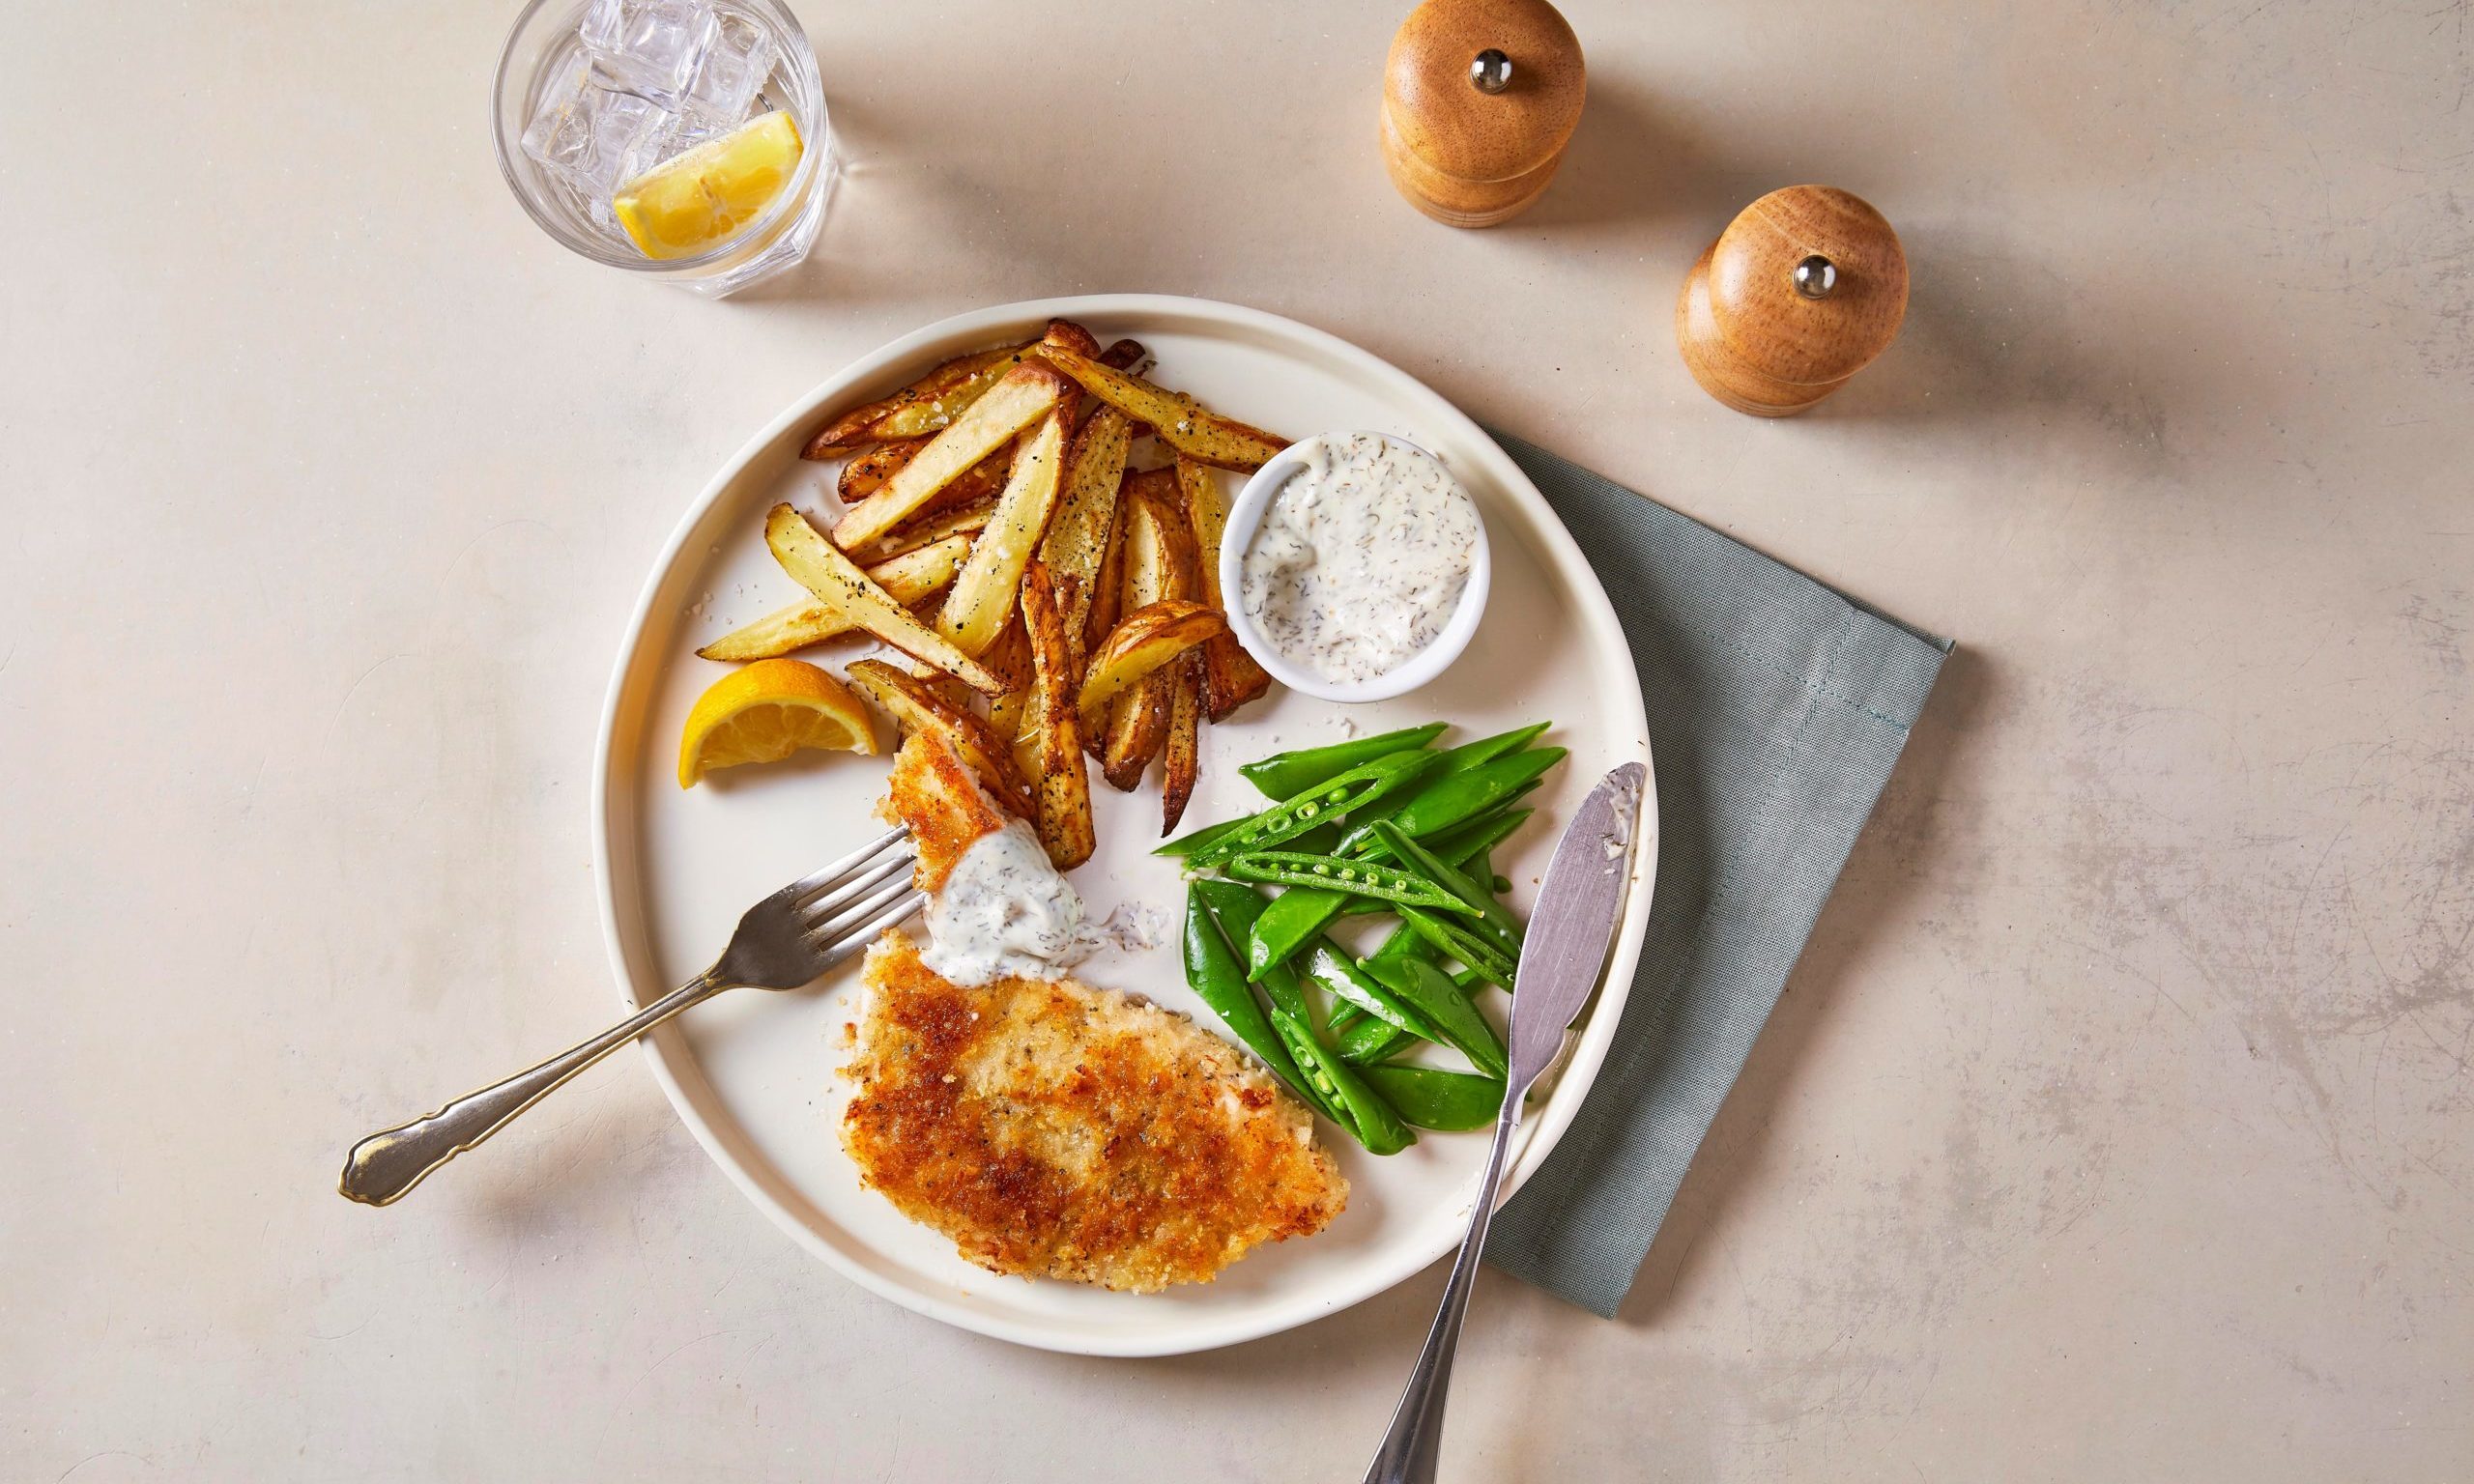 Tasty crispy fish and chips which are so easy to make.